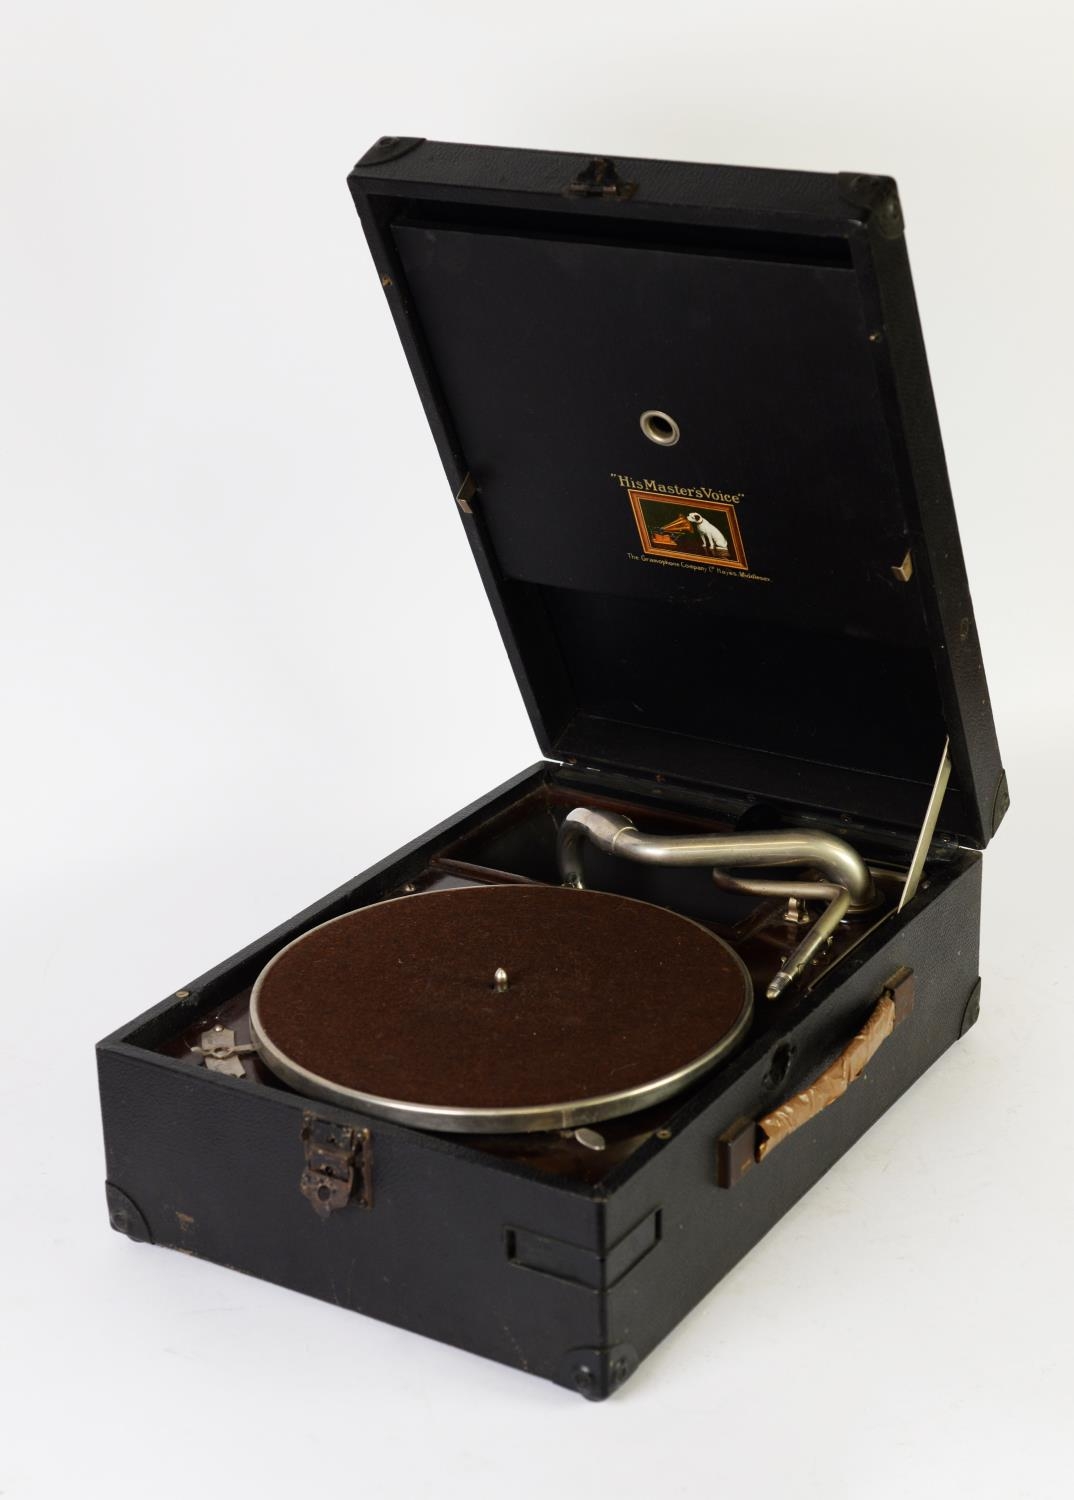 HMV PORTABLE SPRING DRIVEN TABLE TOP RECORD PLAYER in black fabric case, with key and winding - Image 2 of 2